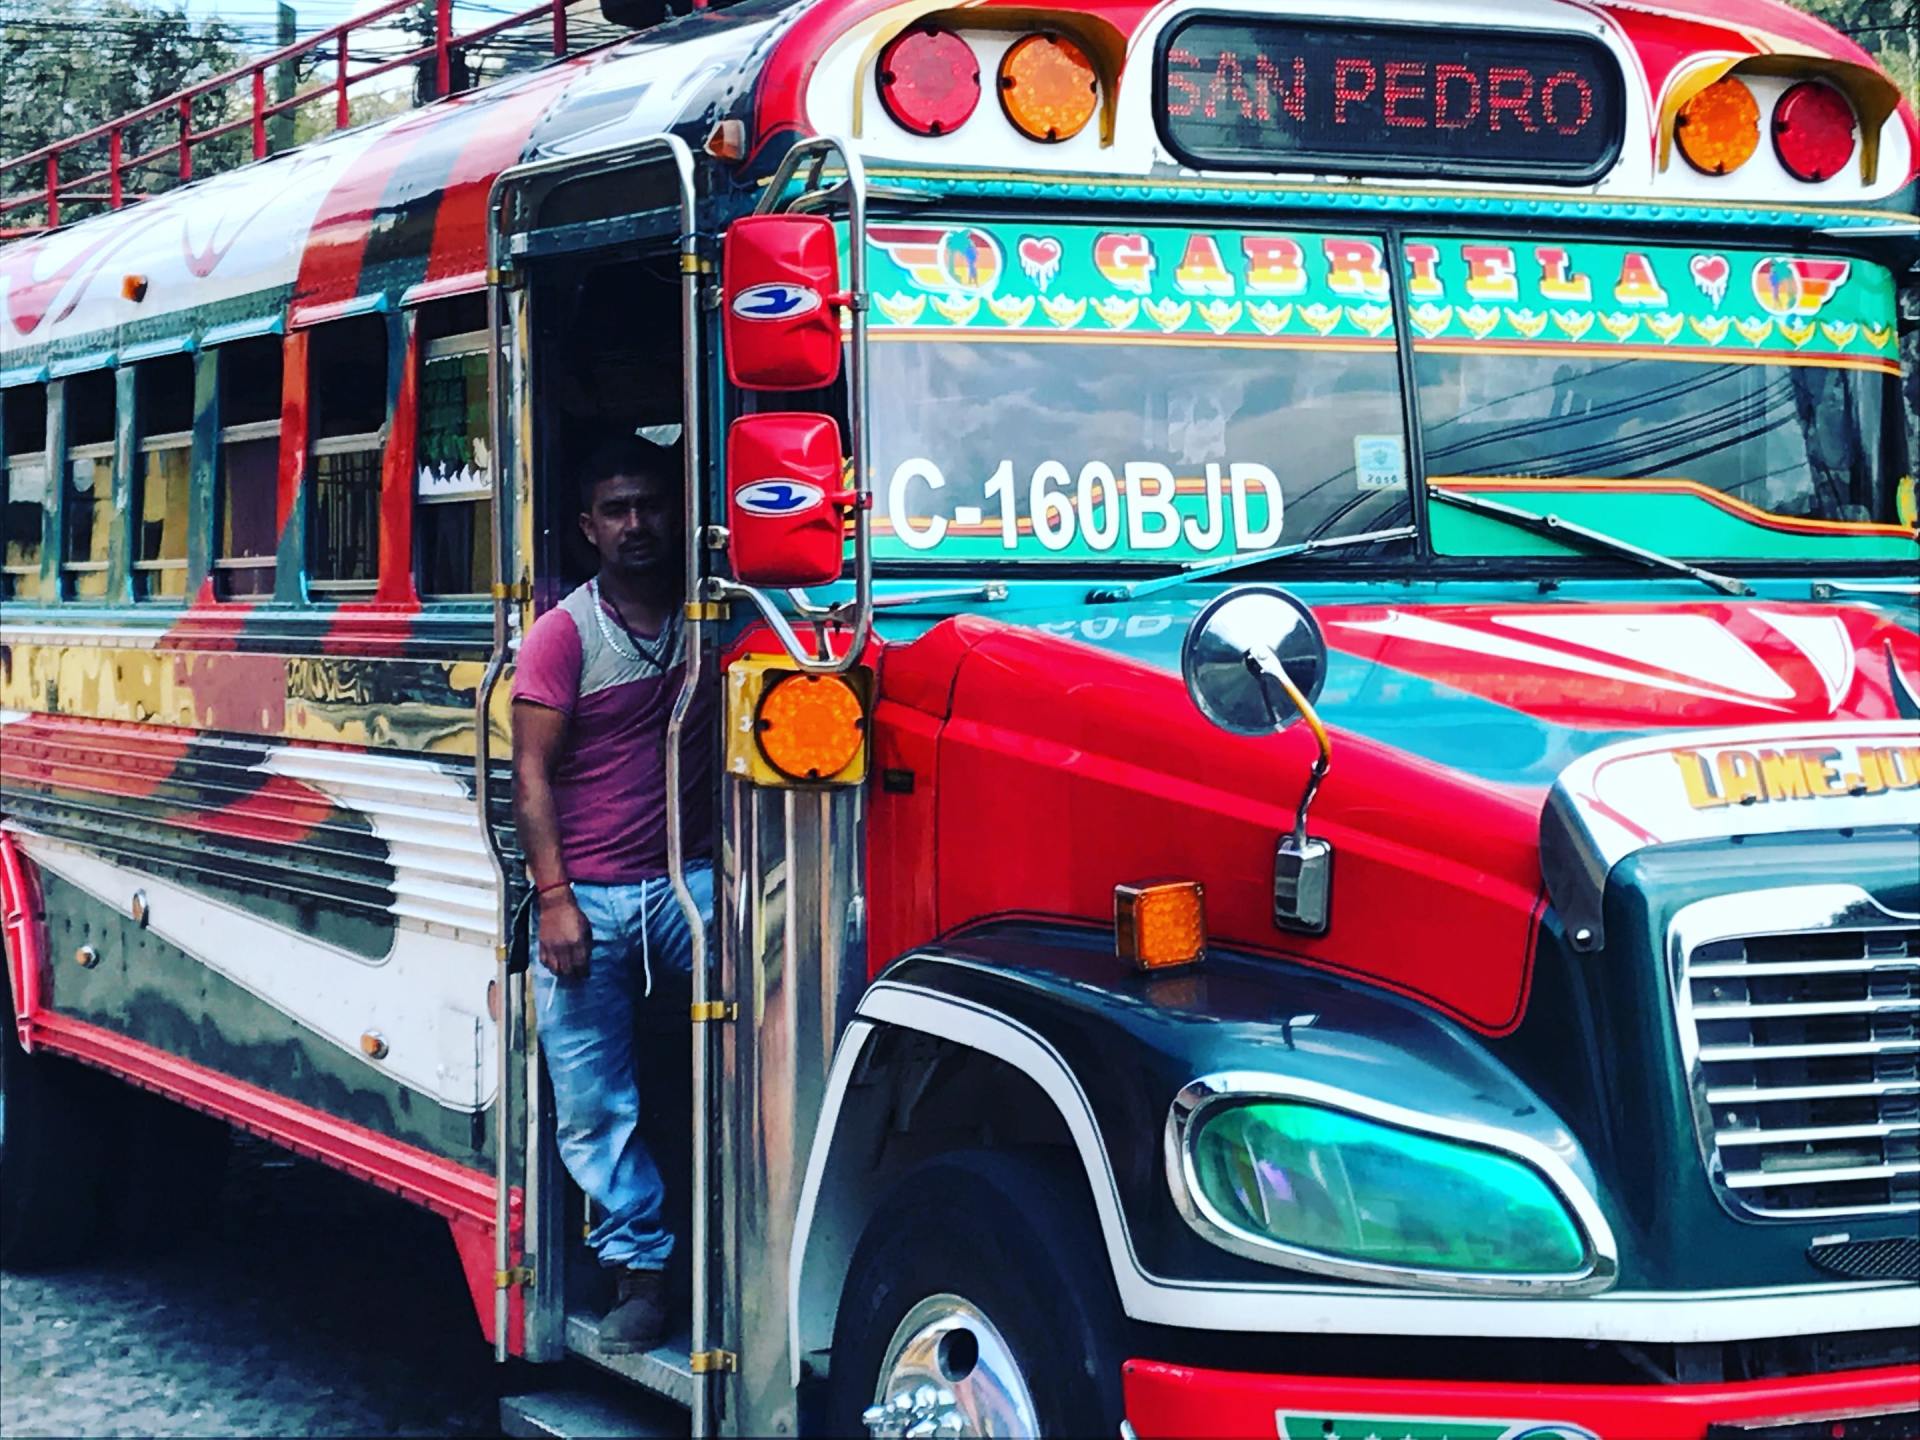 a man is getting off a colorful bus that says pedro on the front .